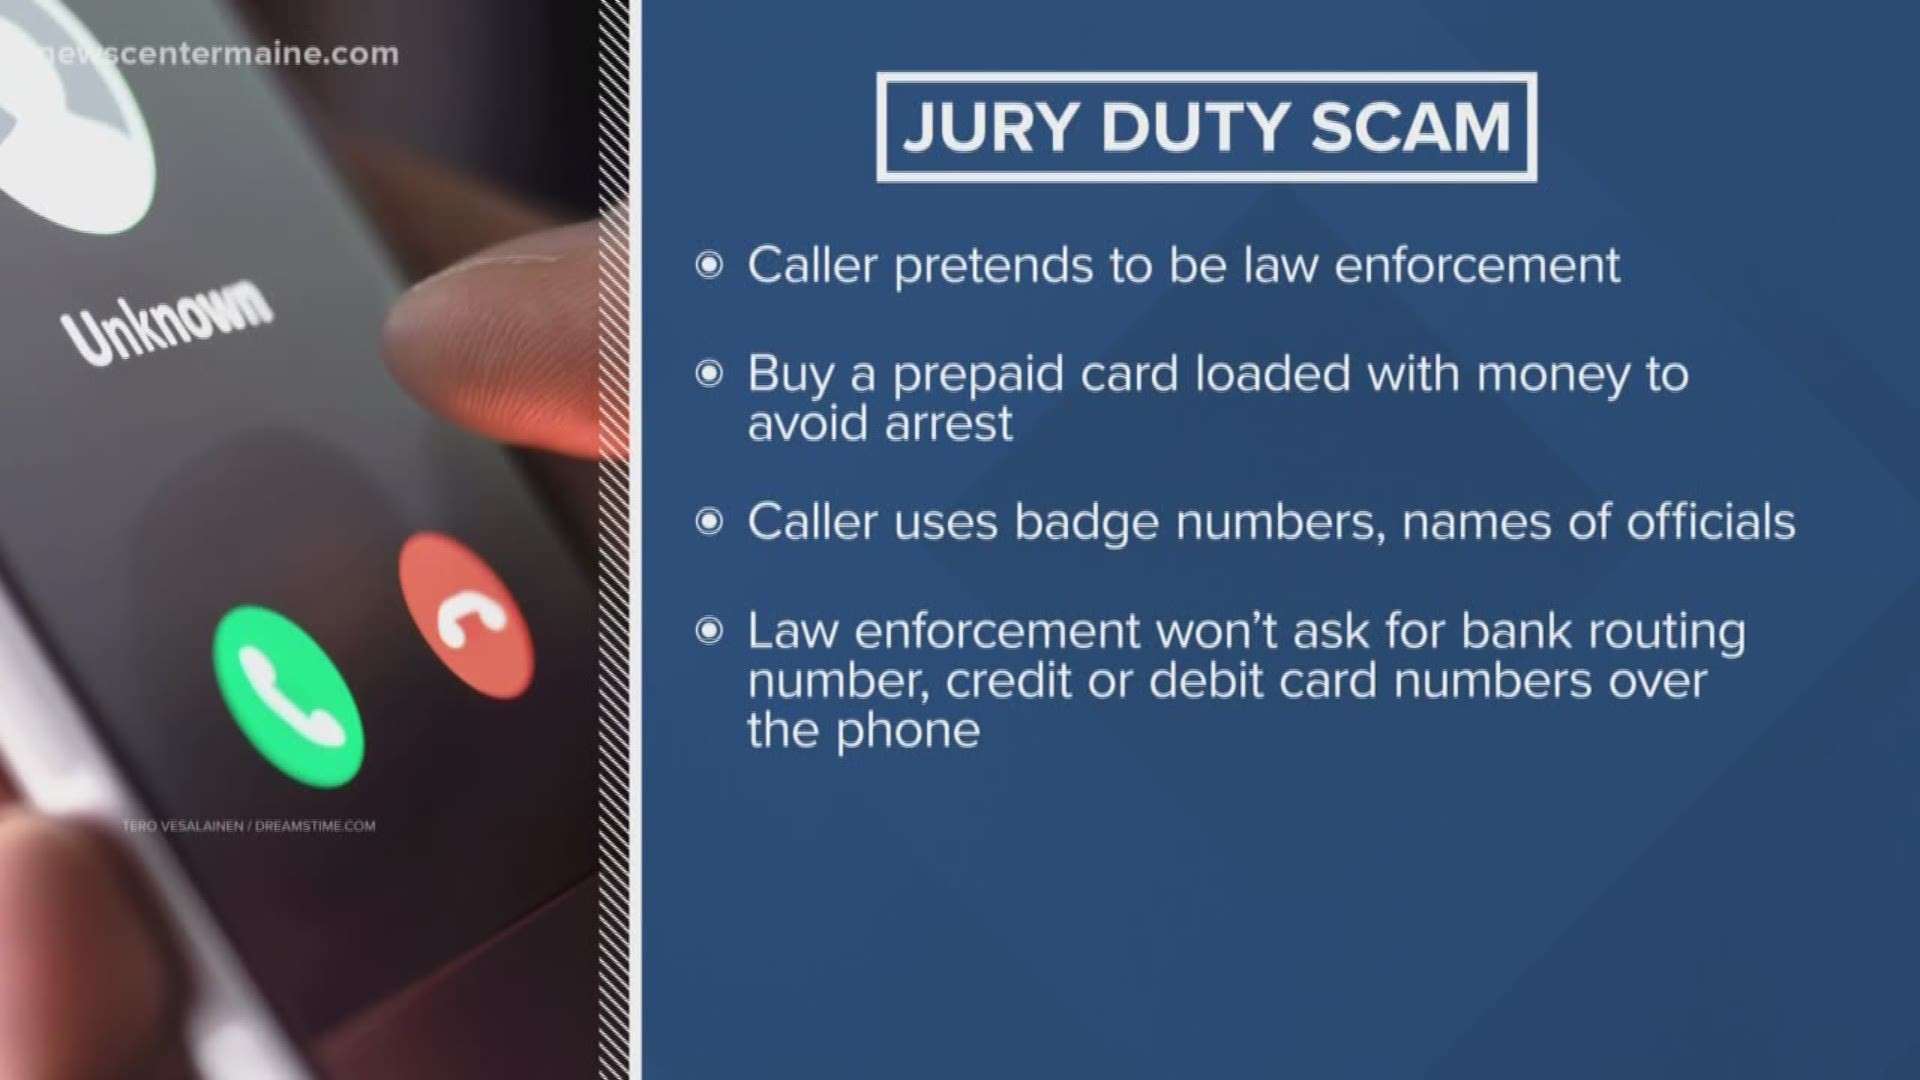 SCAM ALERTS: Augusta Police number spoofed and jury duty fine | newscentermaine.com